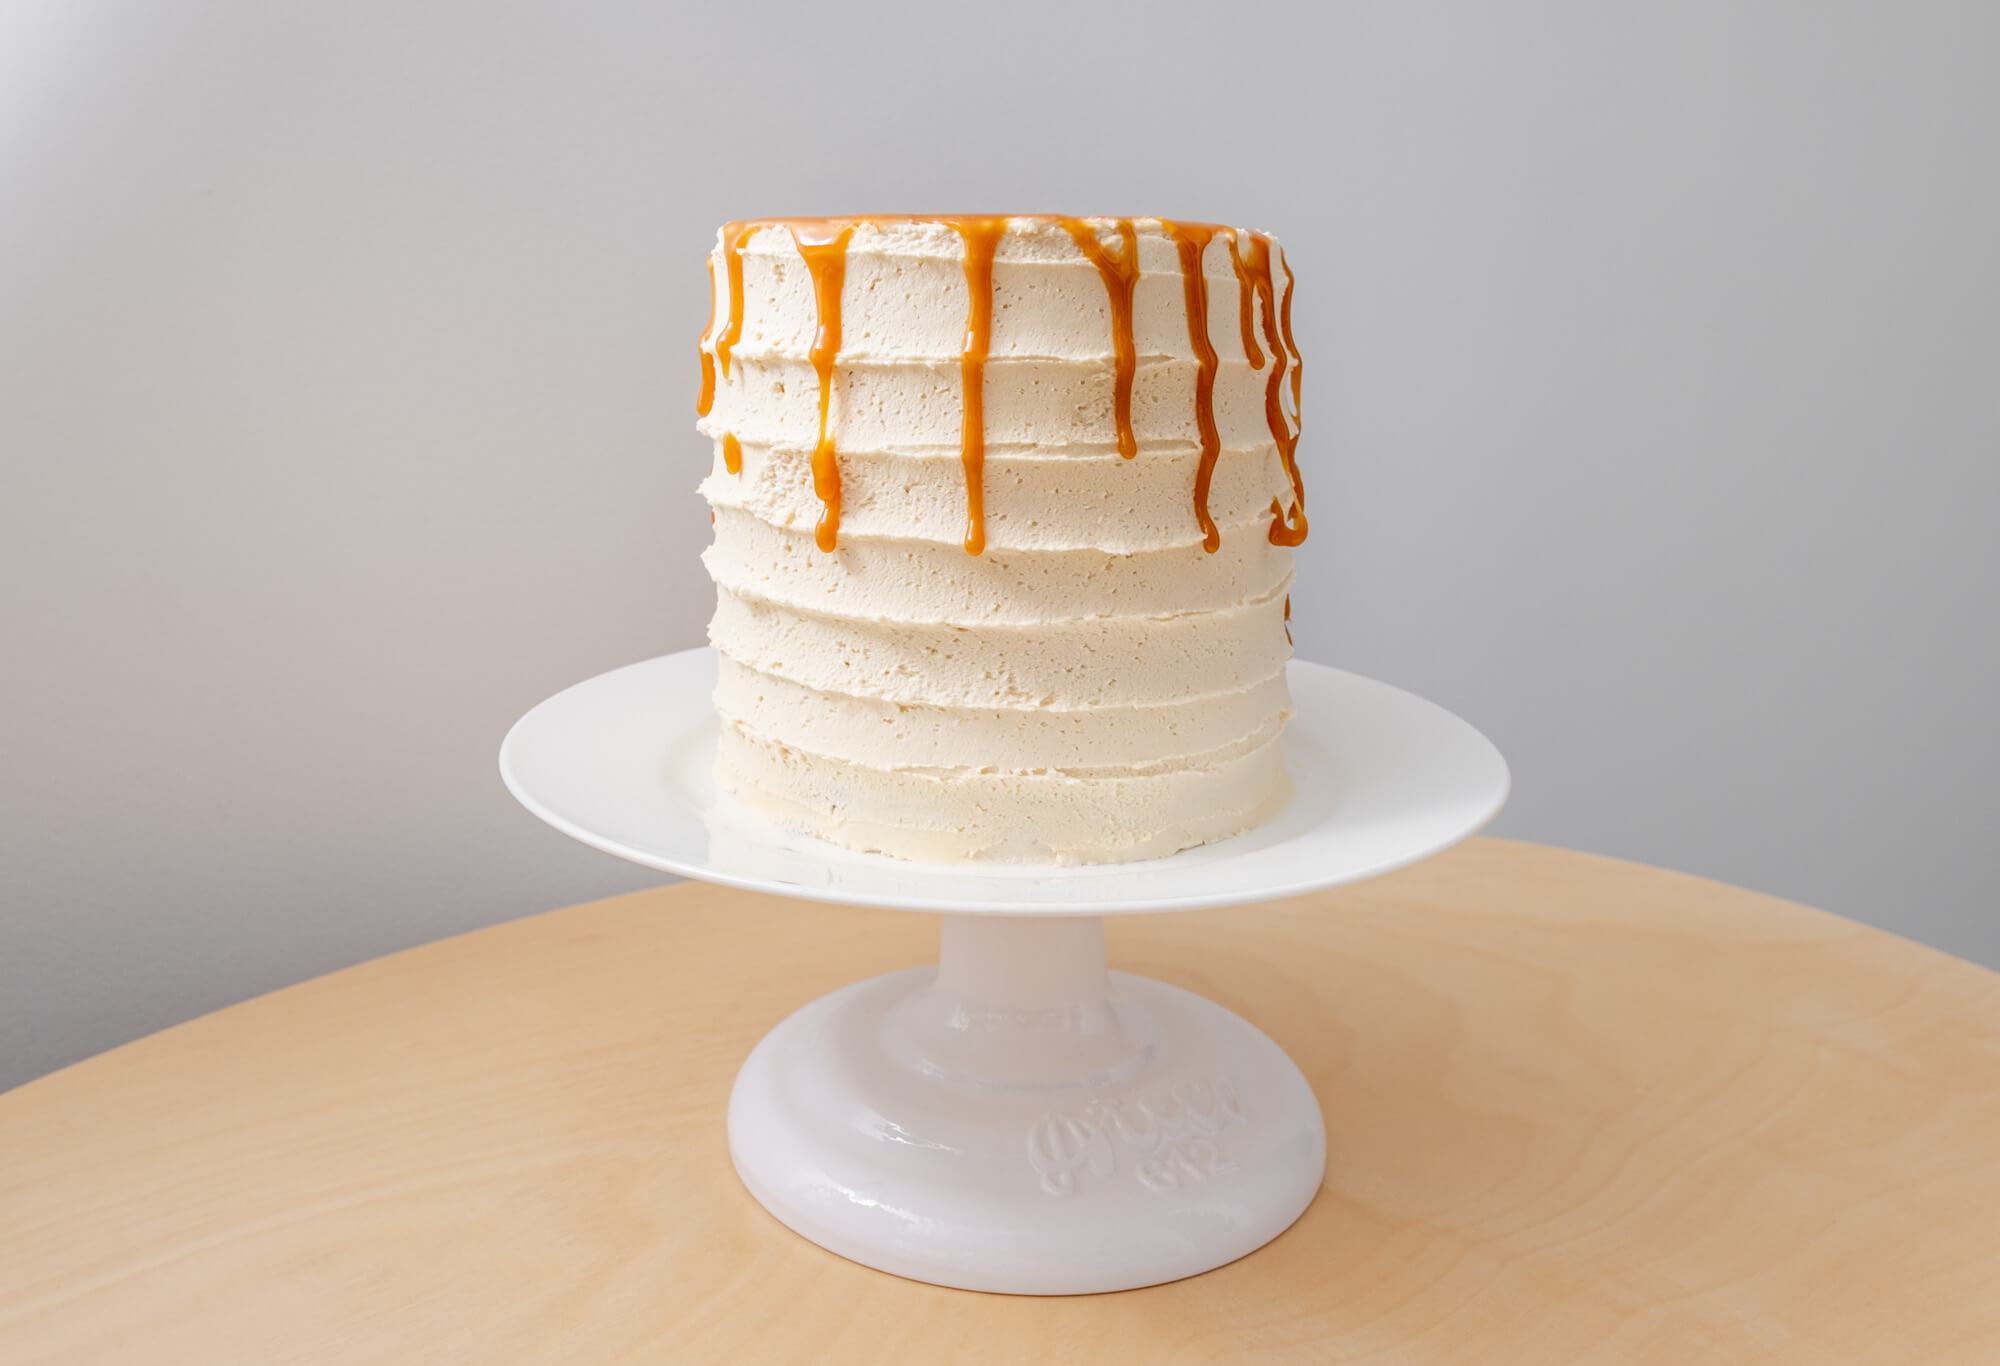 Vegan caramel cake with salted caramel sauce drizzle on a white cake stand